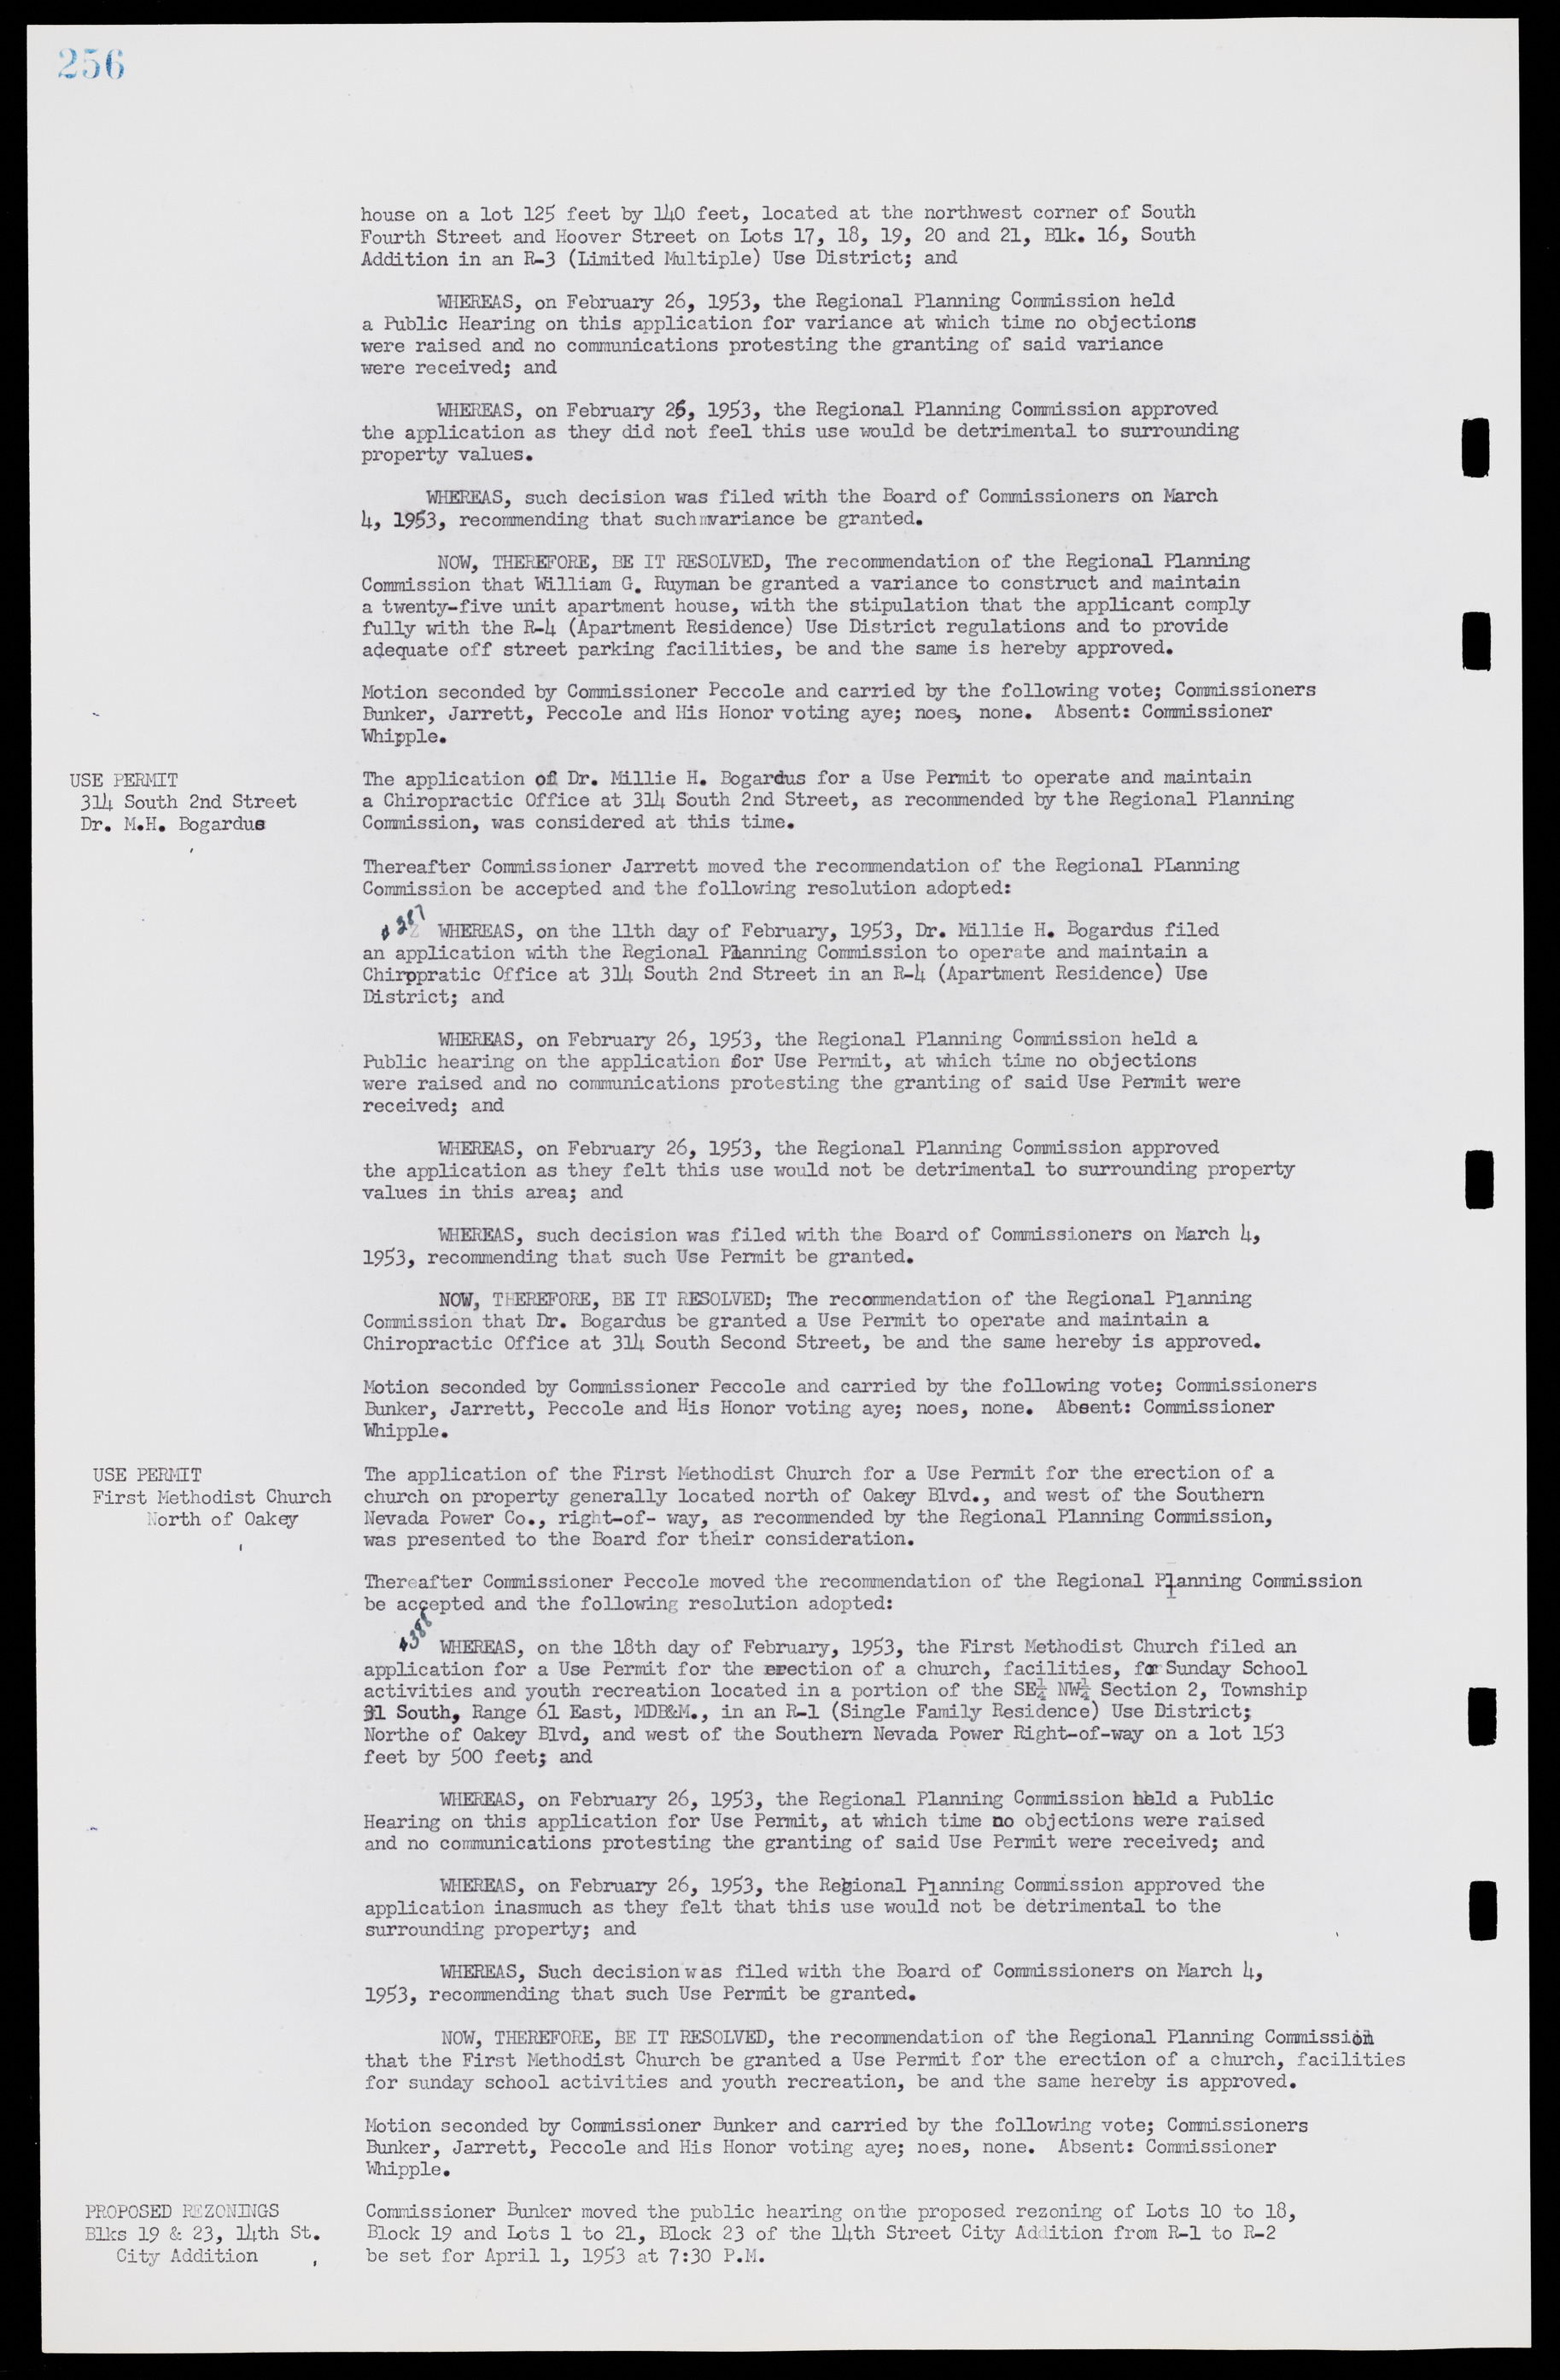 Las Vegas City Commission Minutes, May 26, 1952 to February 17, 1954, lvc000008-272